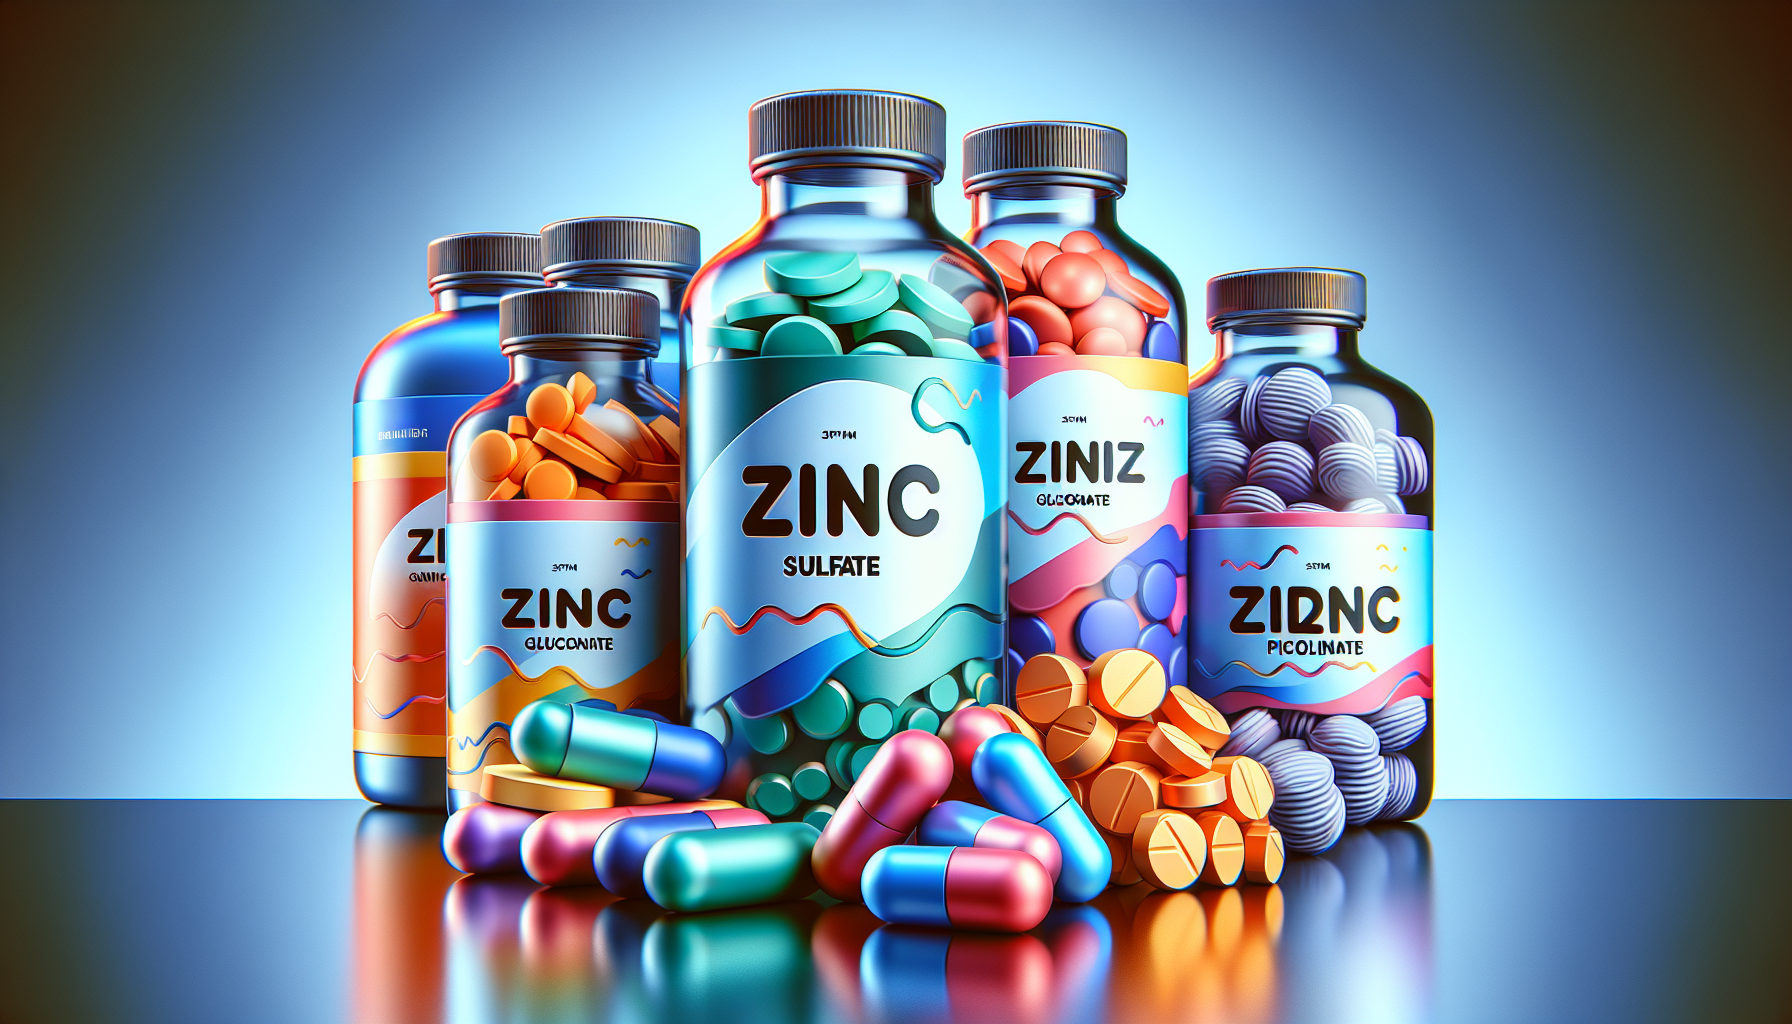 Illustration of different types of zinc supplements